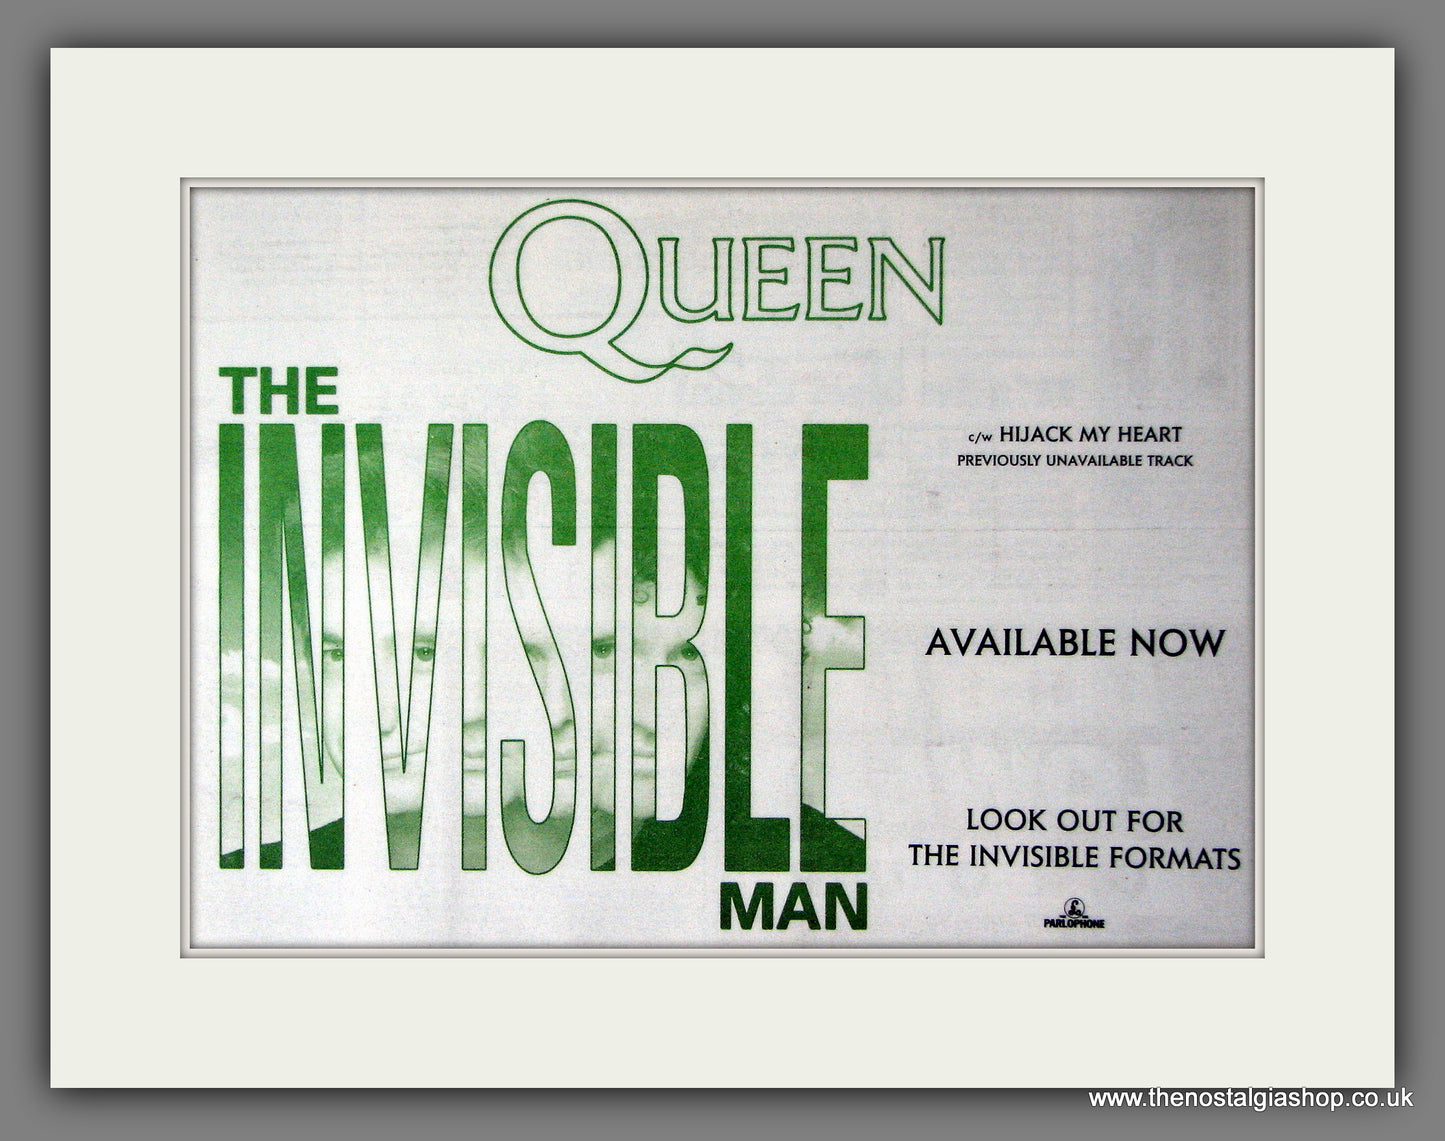 Queen The Invisible Man. Vintage Advert 1989 (ref AD56473)